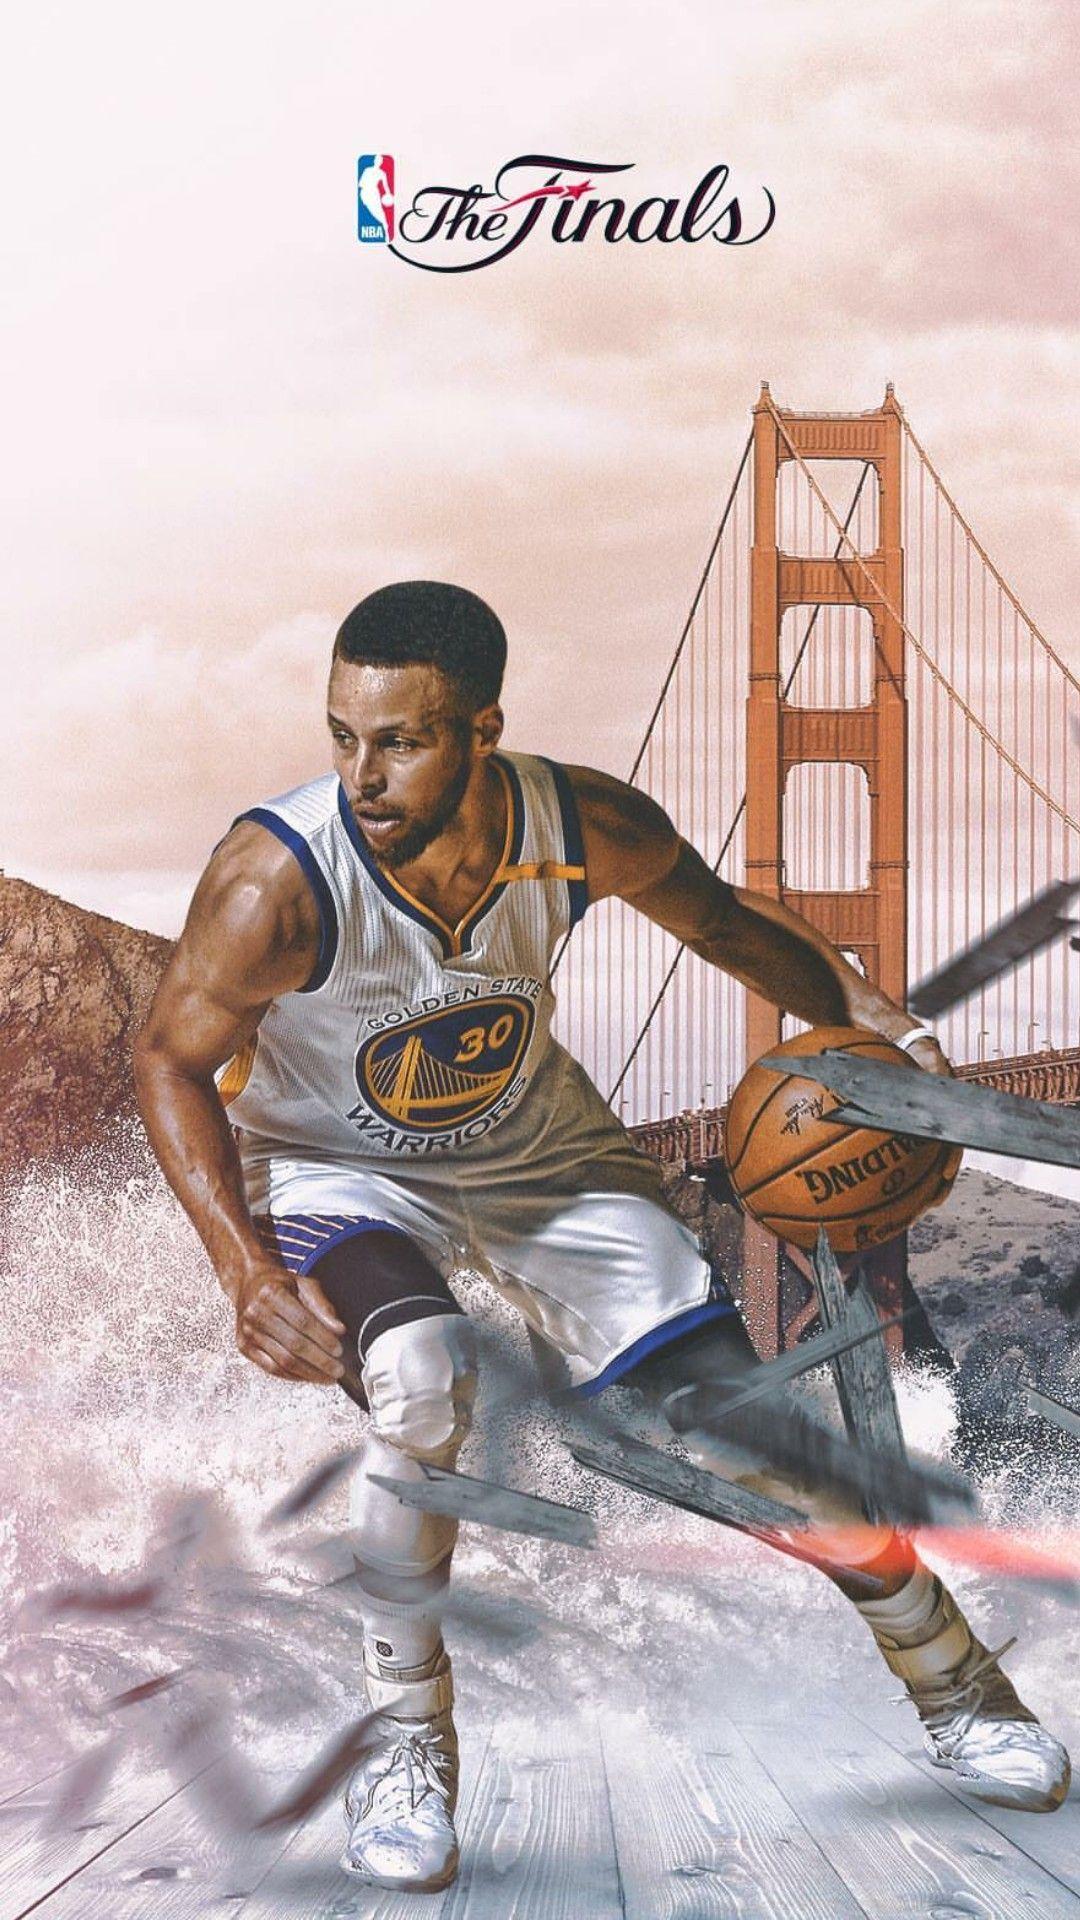 Stephen curry wallpaper. NBA. Curry basketball, Curry nba, Curry